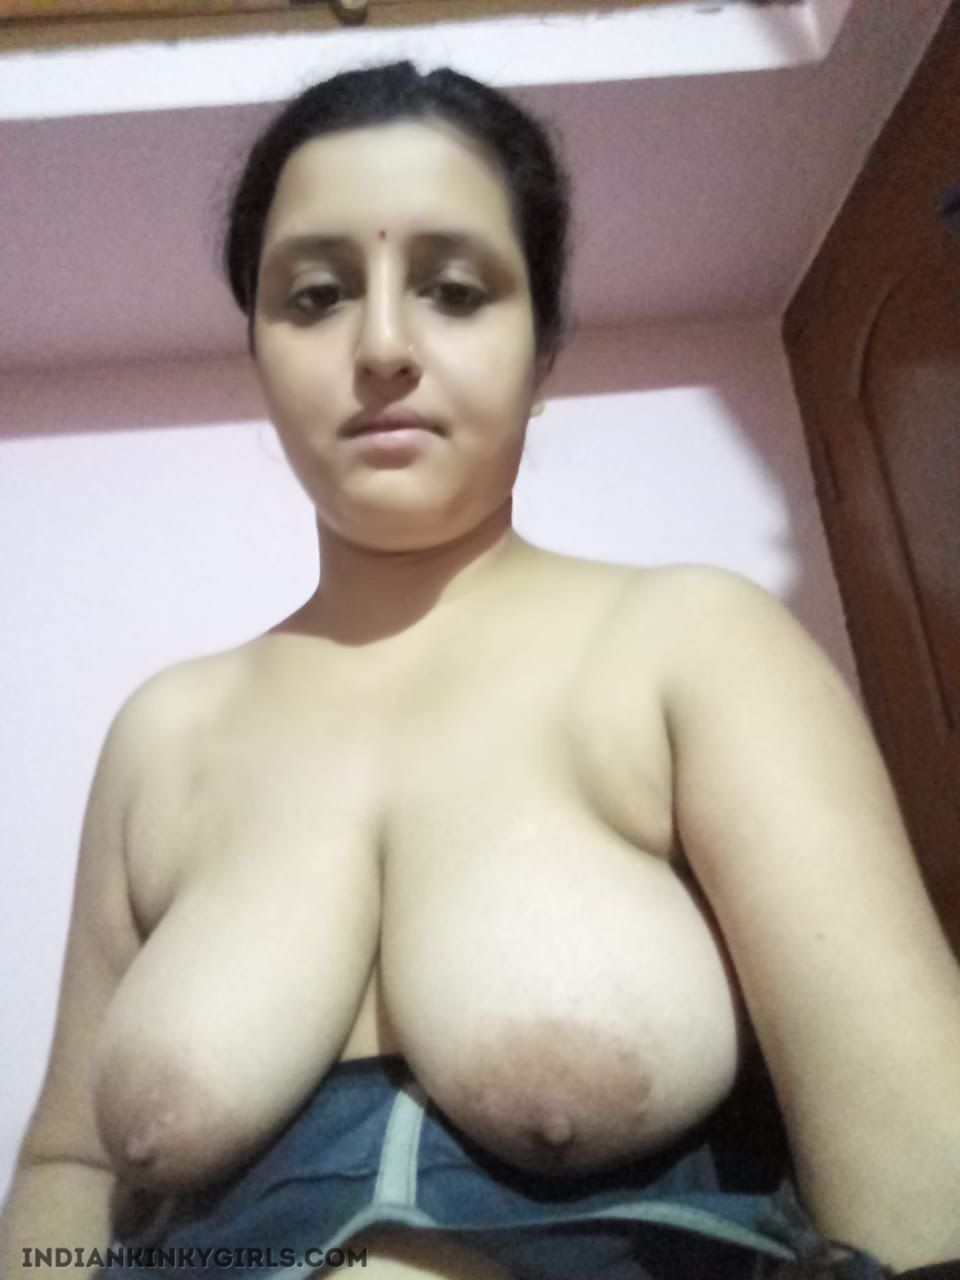 Sexy Indian Wife With Big Boobs Nude Selfies image